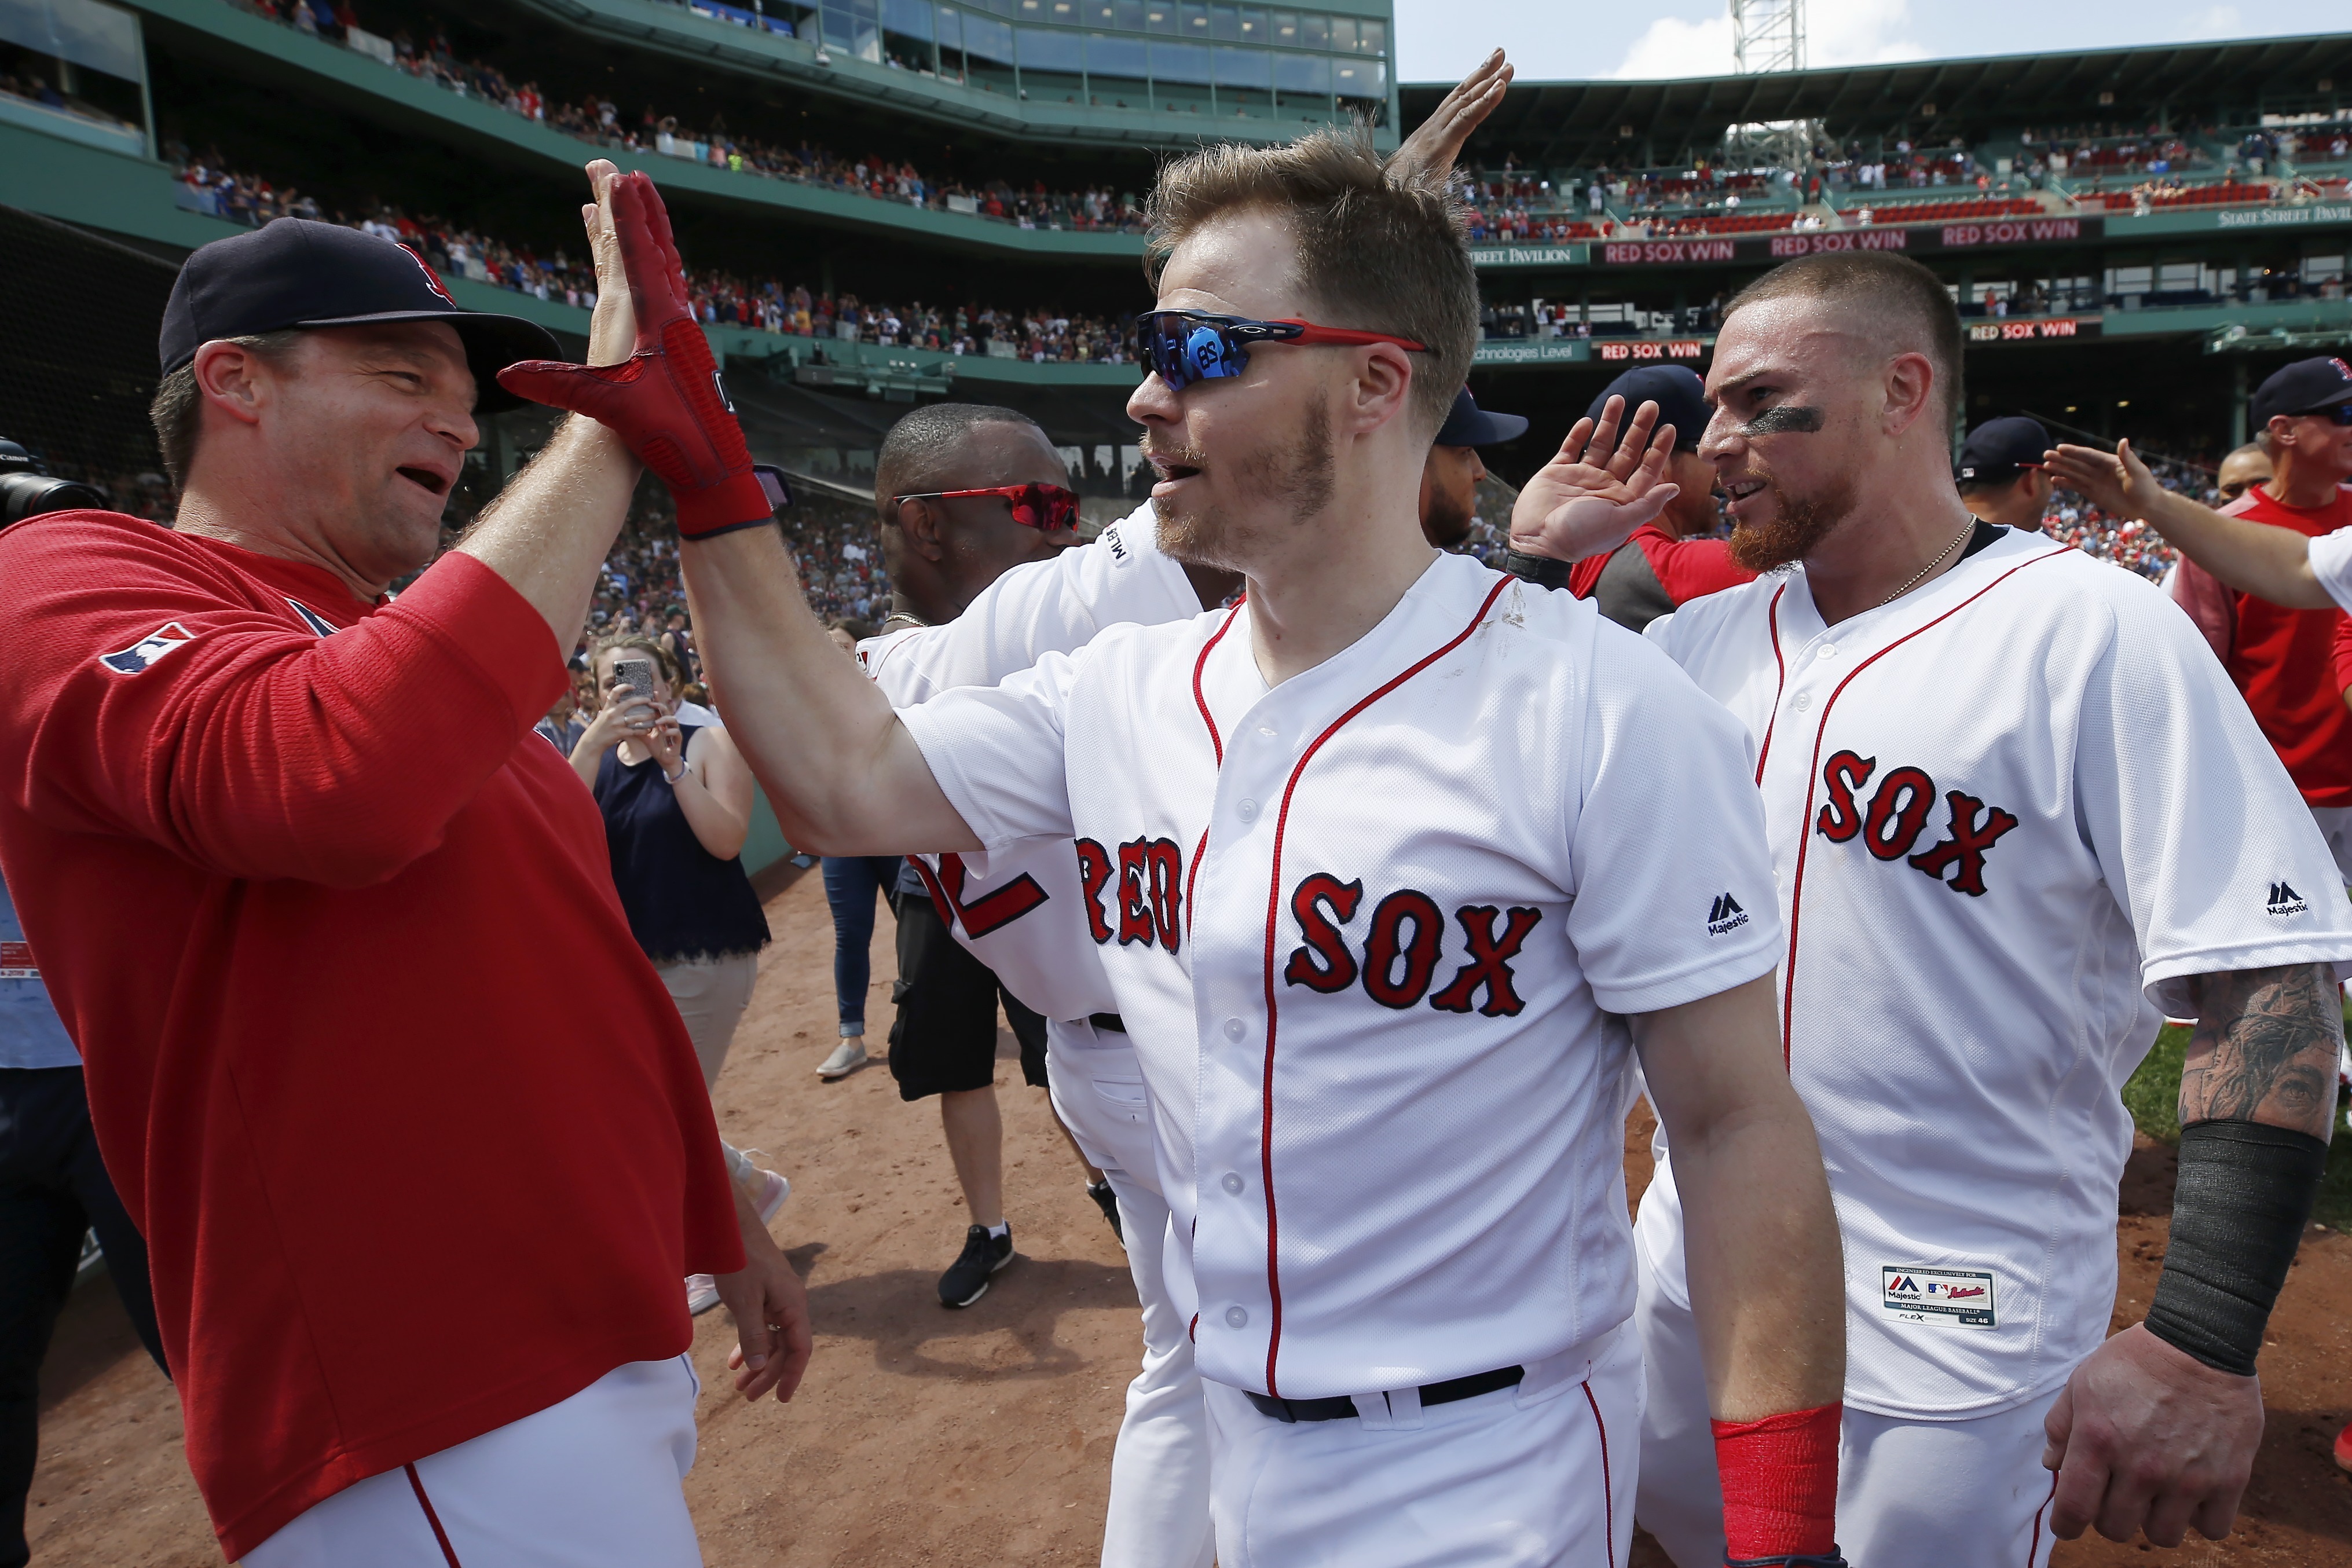 Brock Holt fits right in at All-Star Game - The Boston Globe